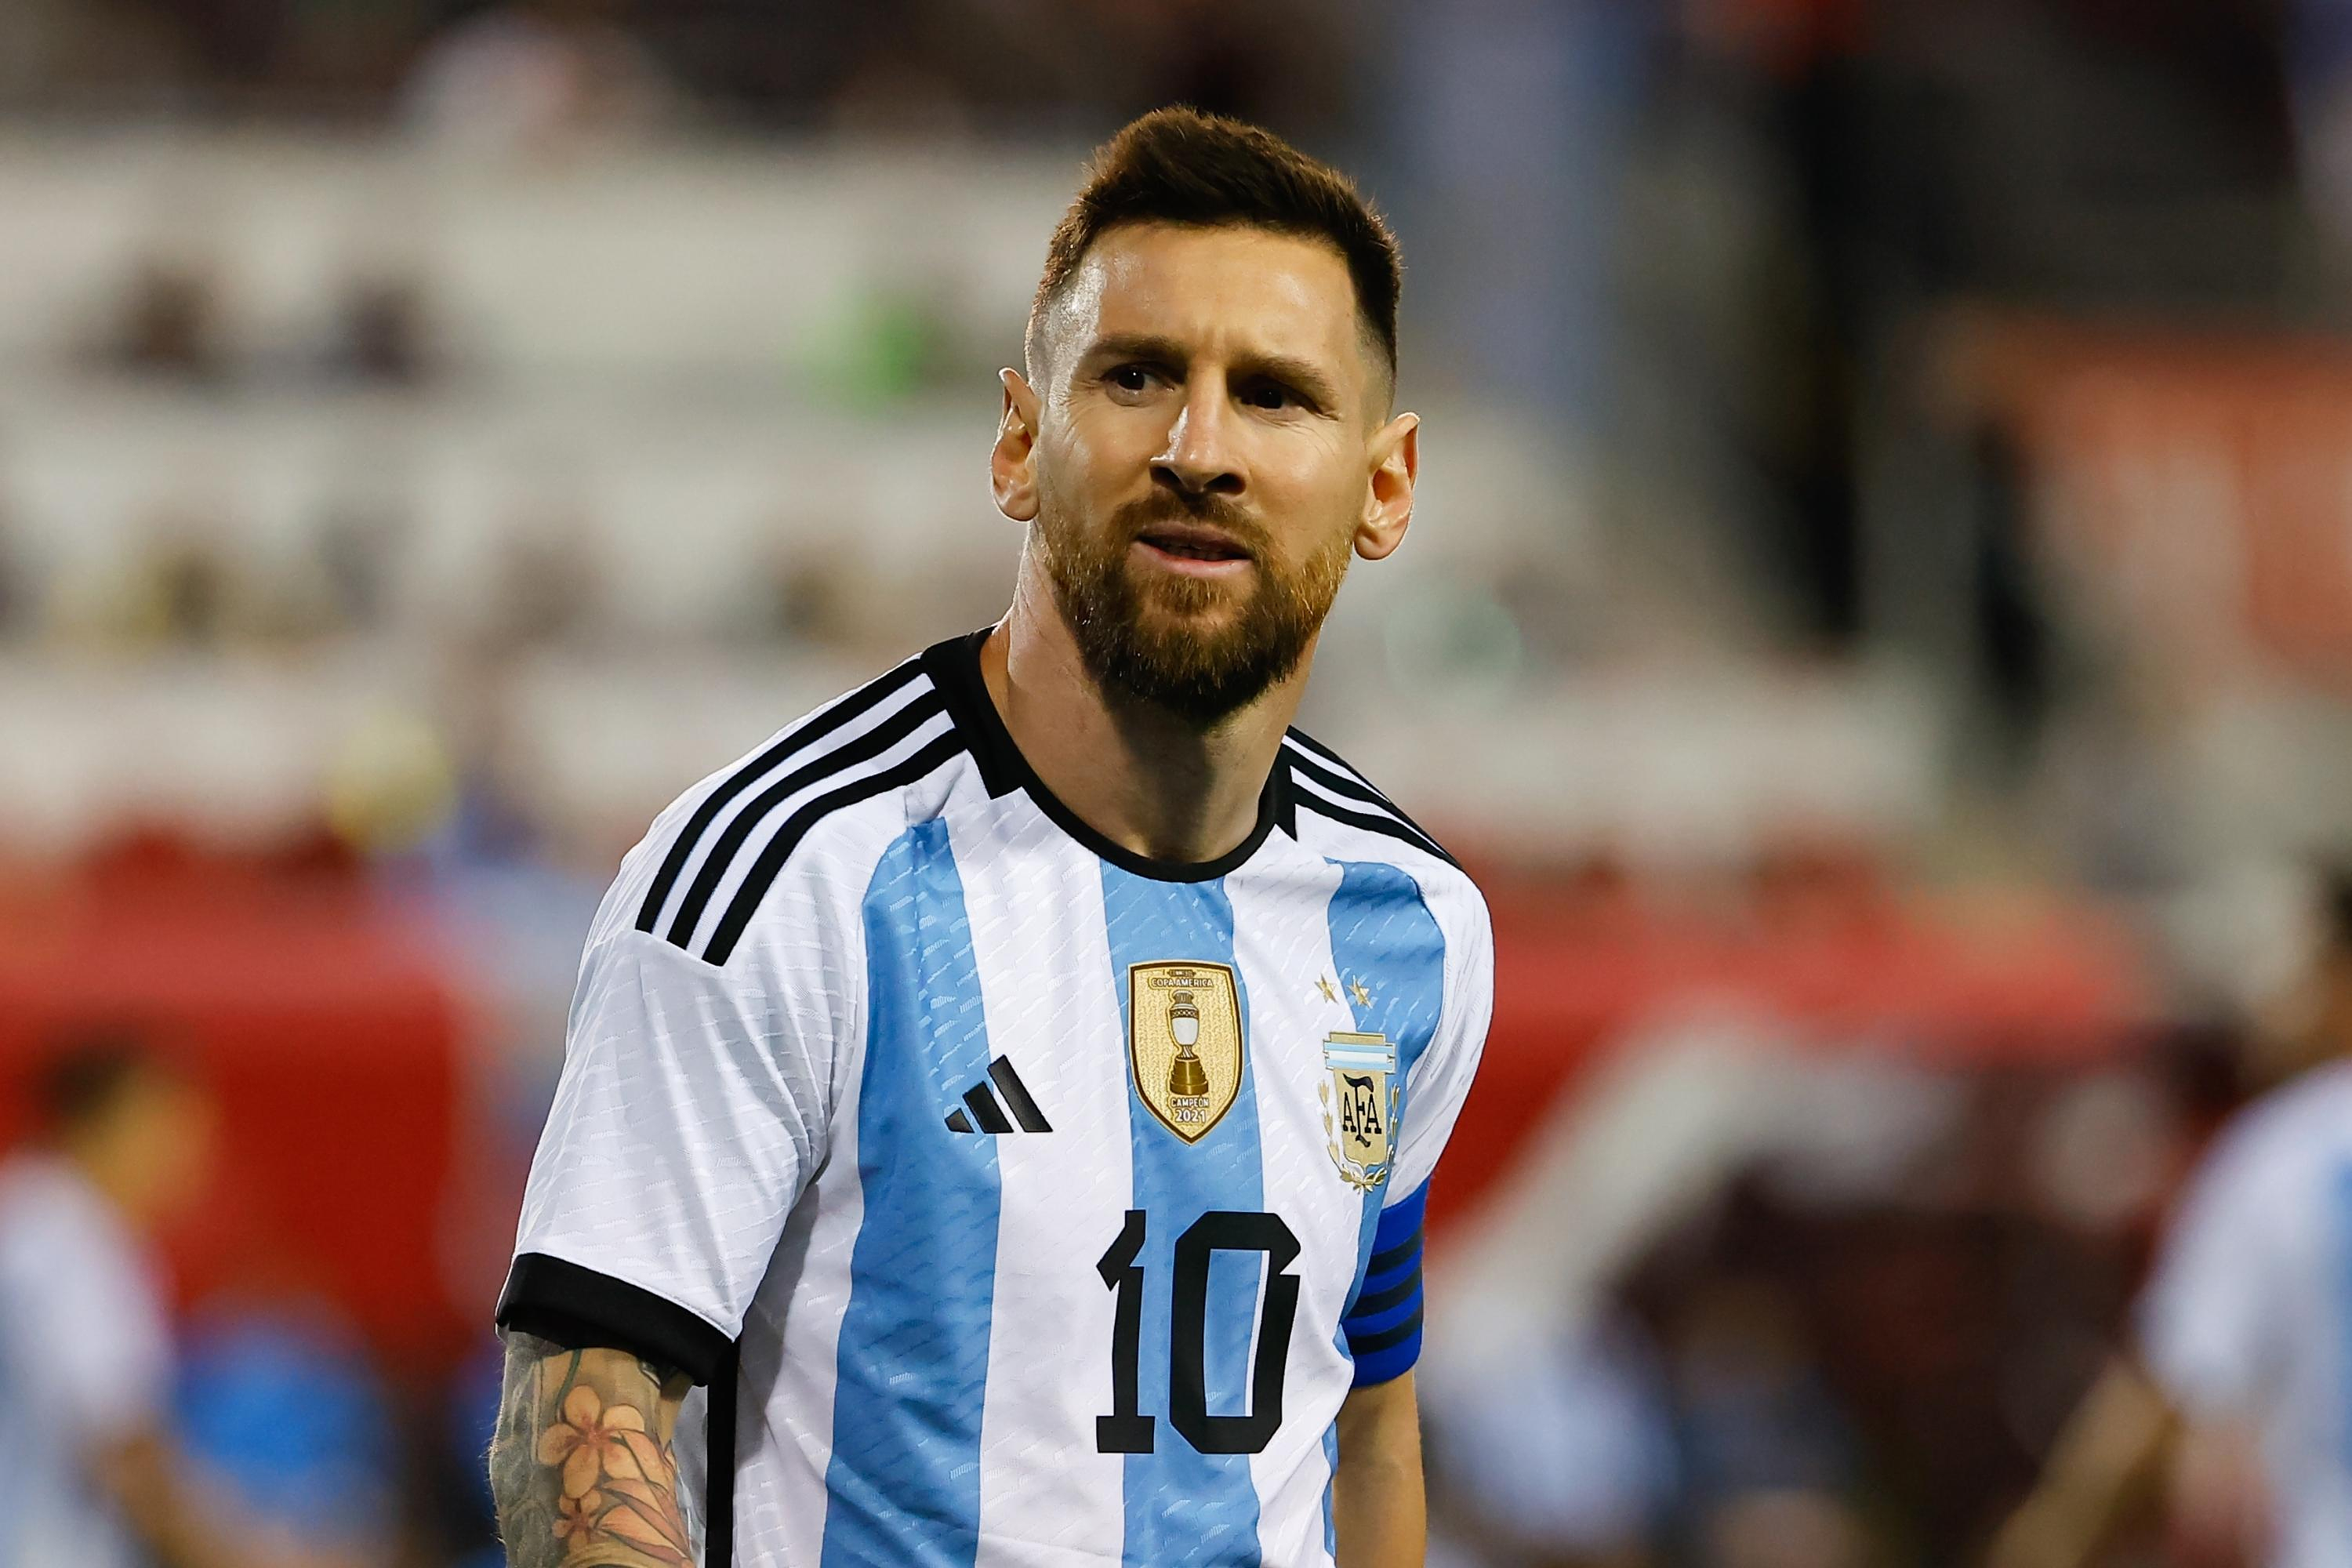 Football: $7.8 million at auction for Messi's jerseys at the 2022 World Cup